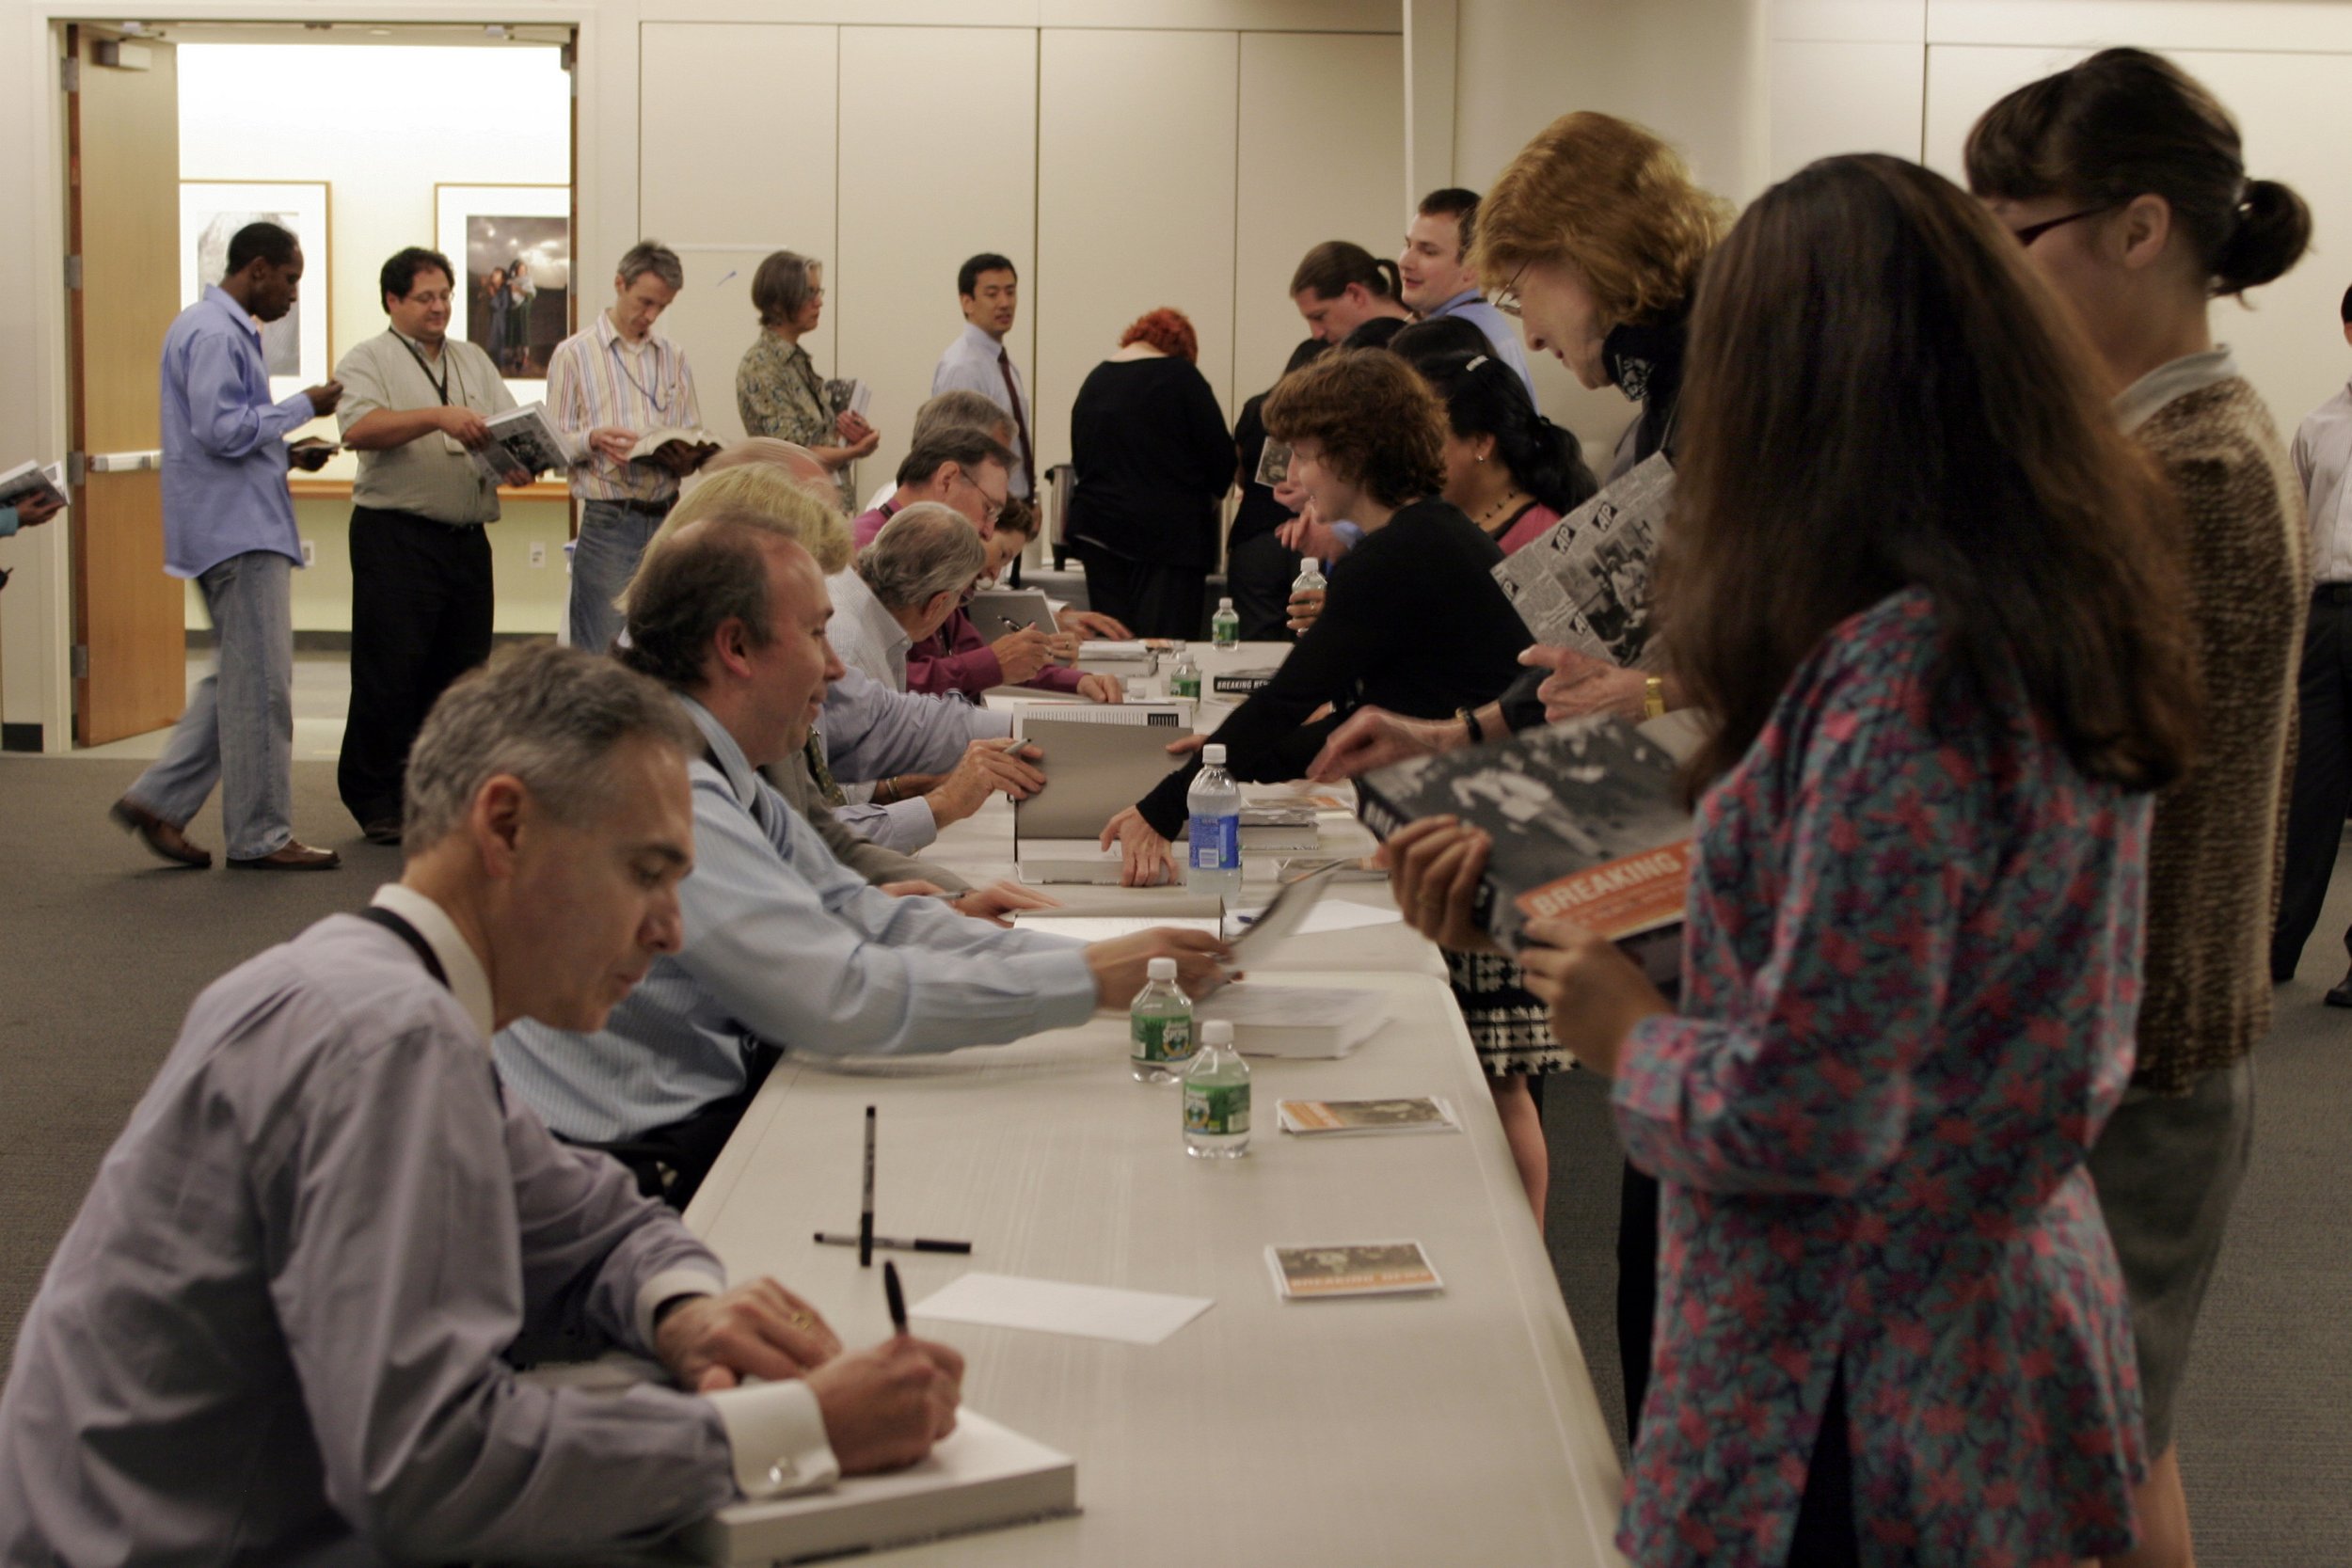 Staff book signing